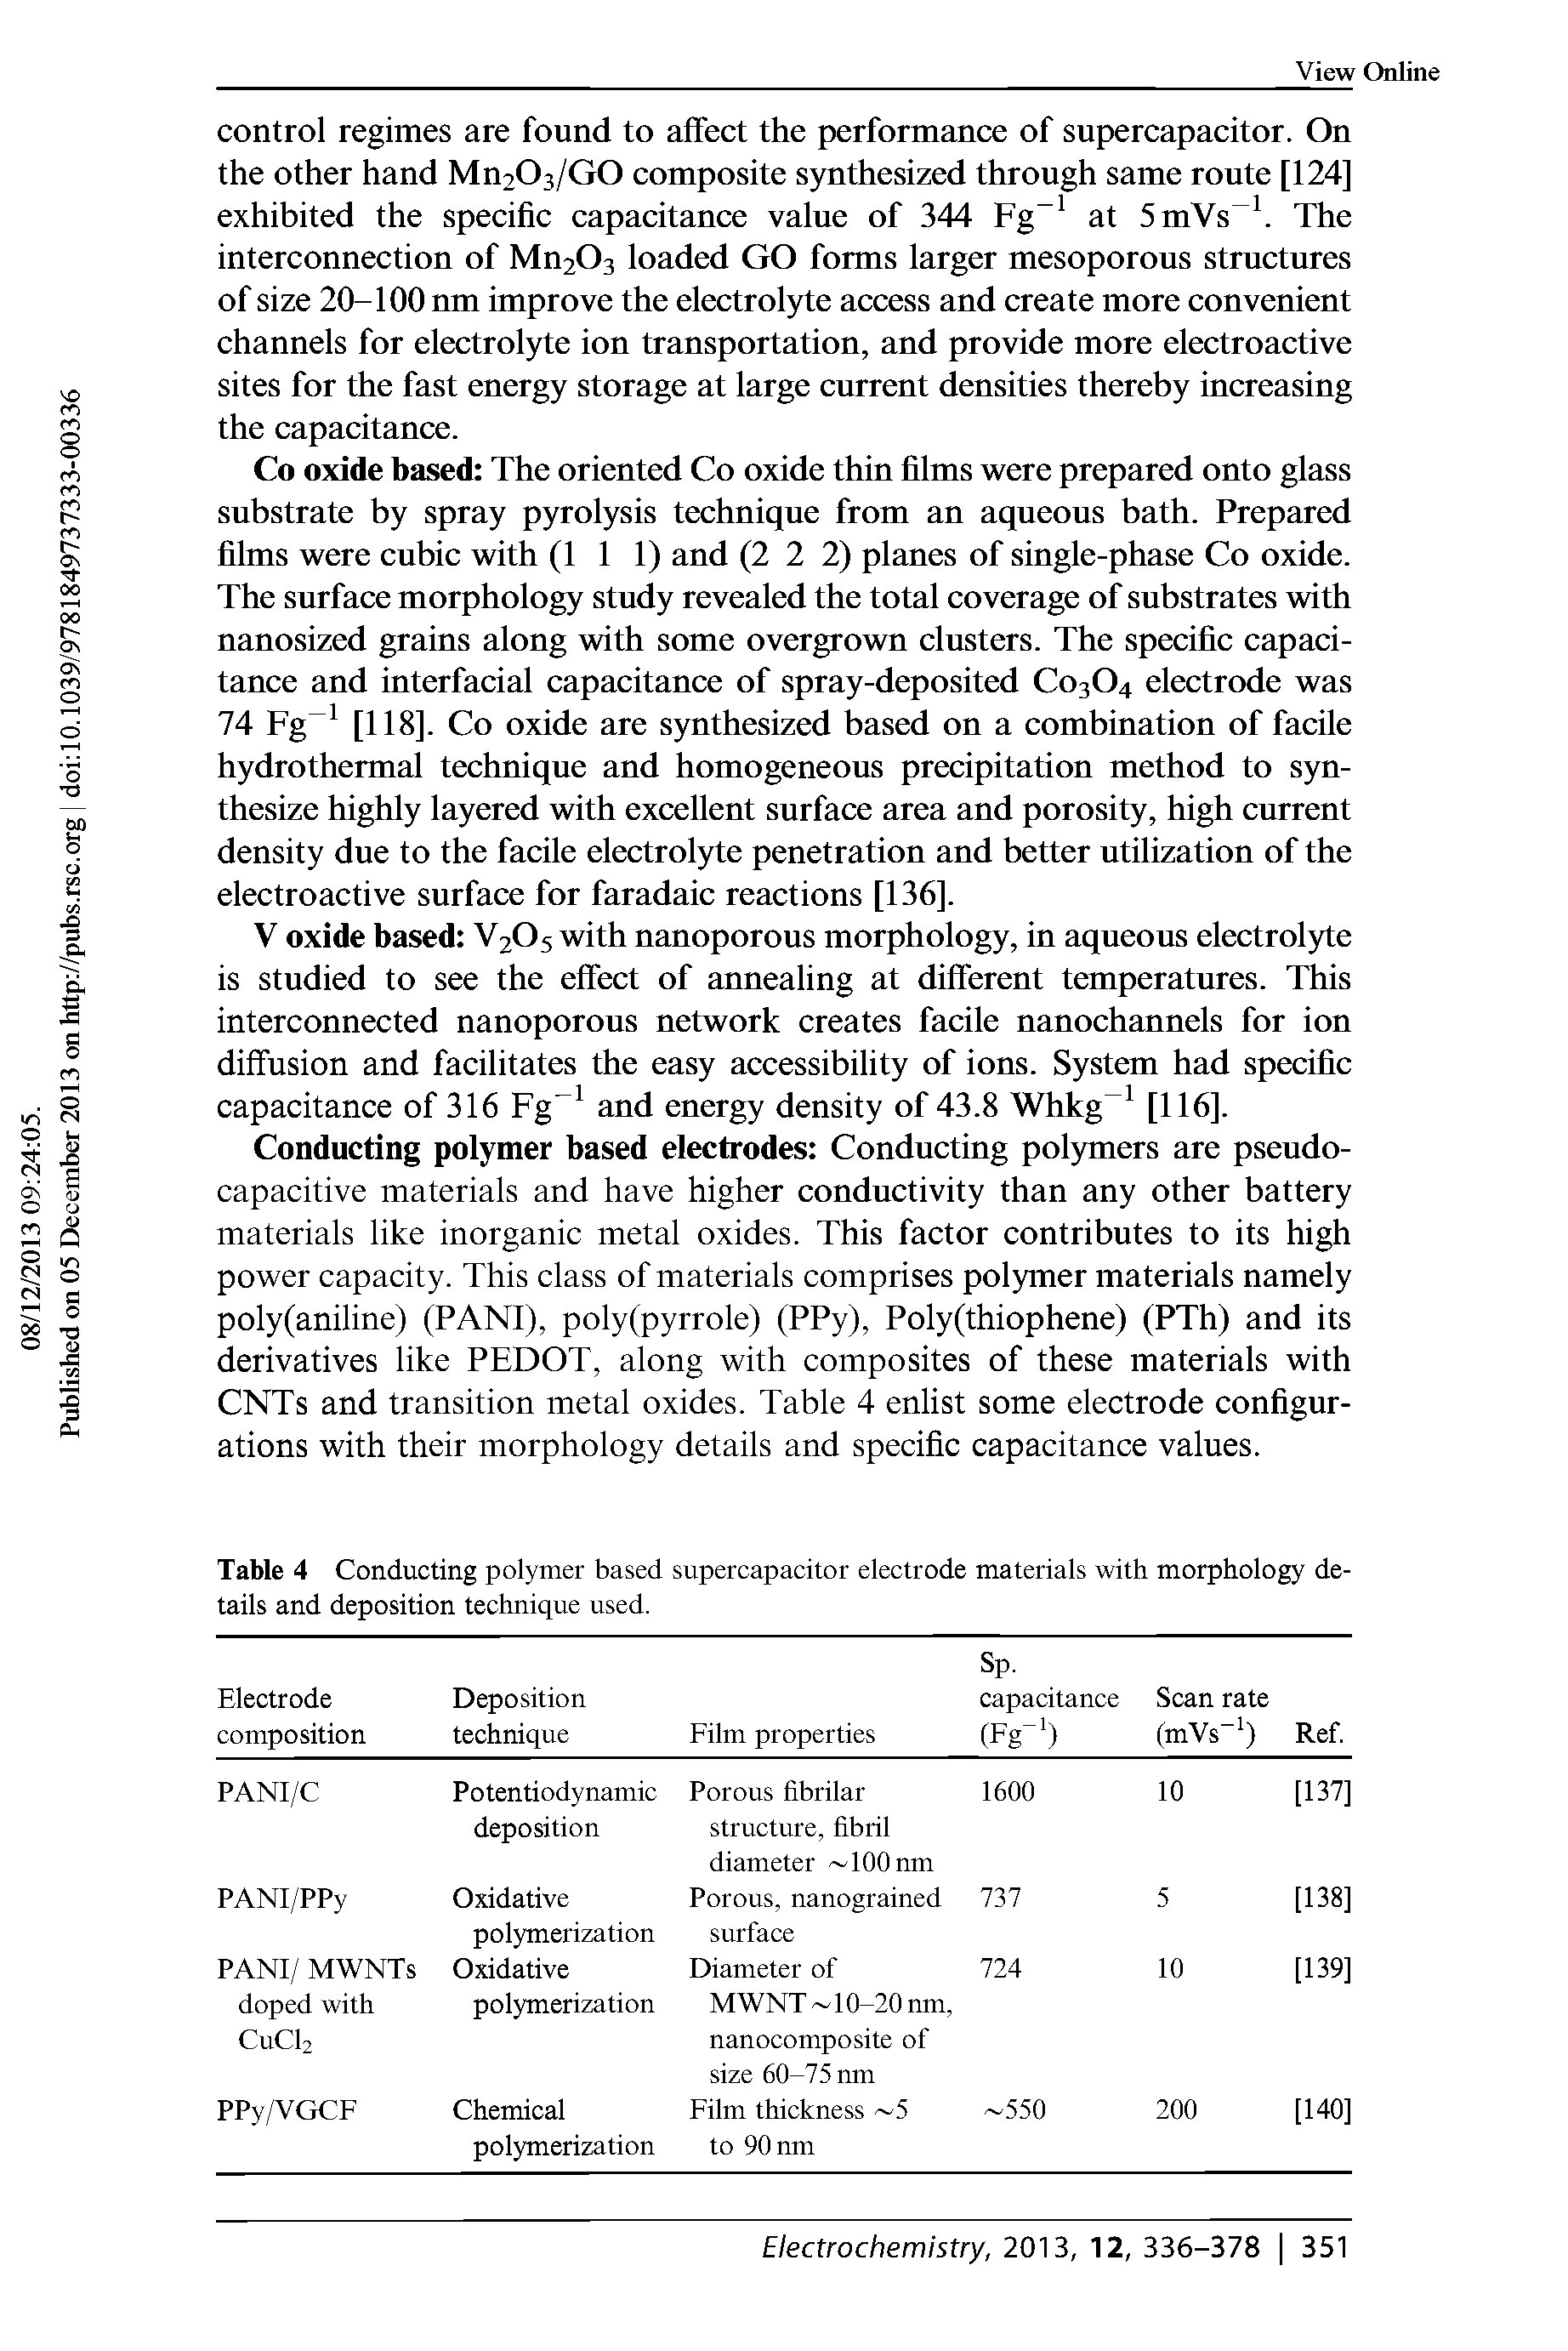 Table 4 Conducting polymer based supercapacitor electrode materials with morphology details and deposition technique used.